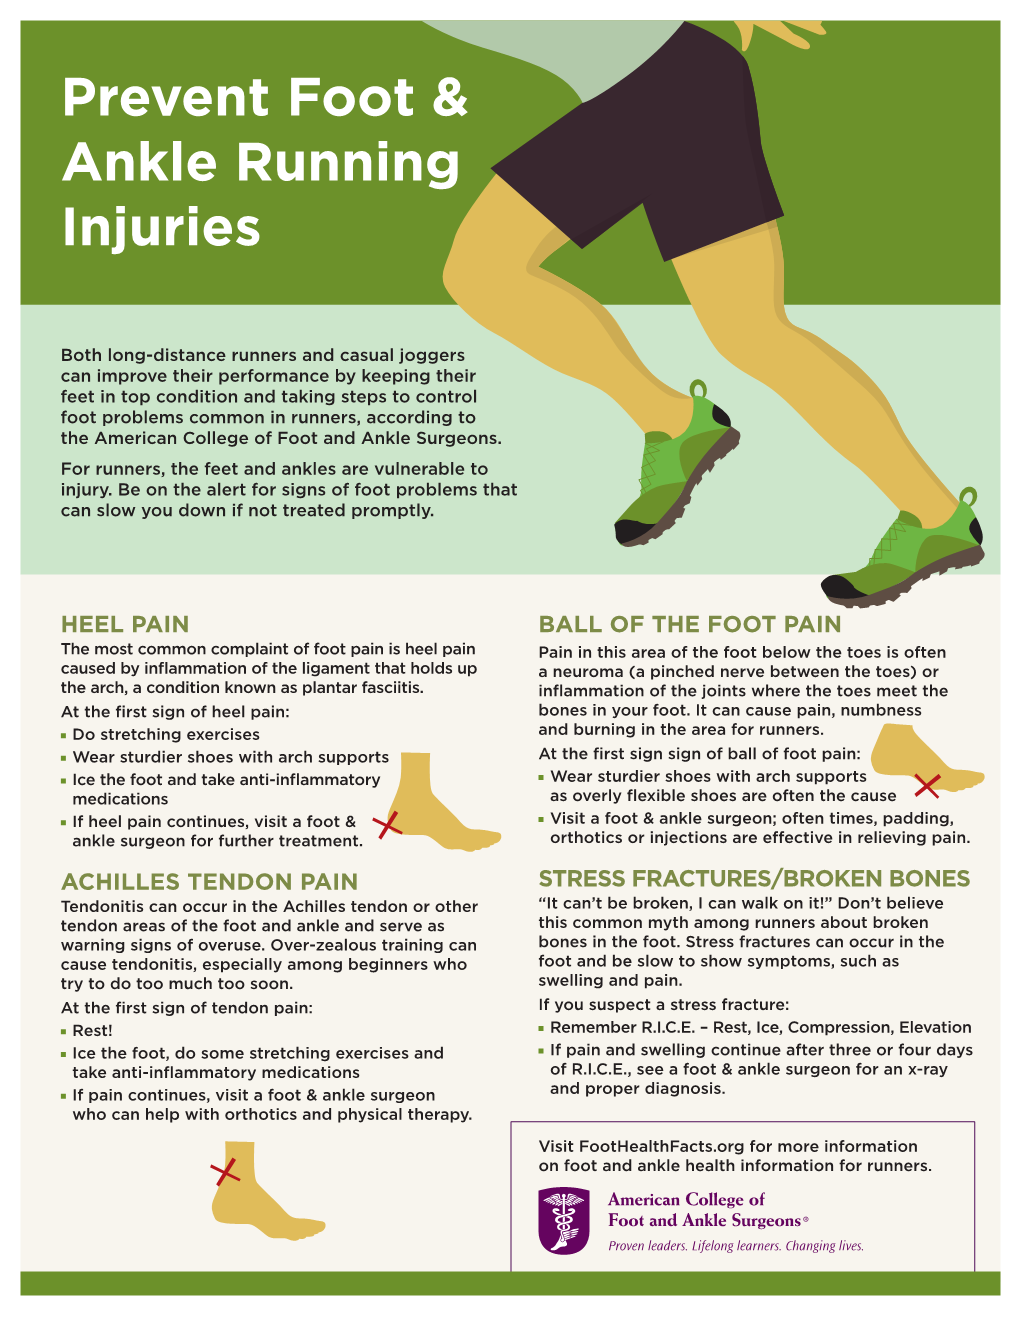 Prevent Foot & Ankle Running Injuries